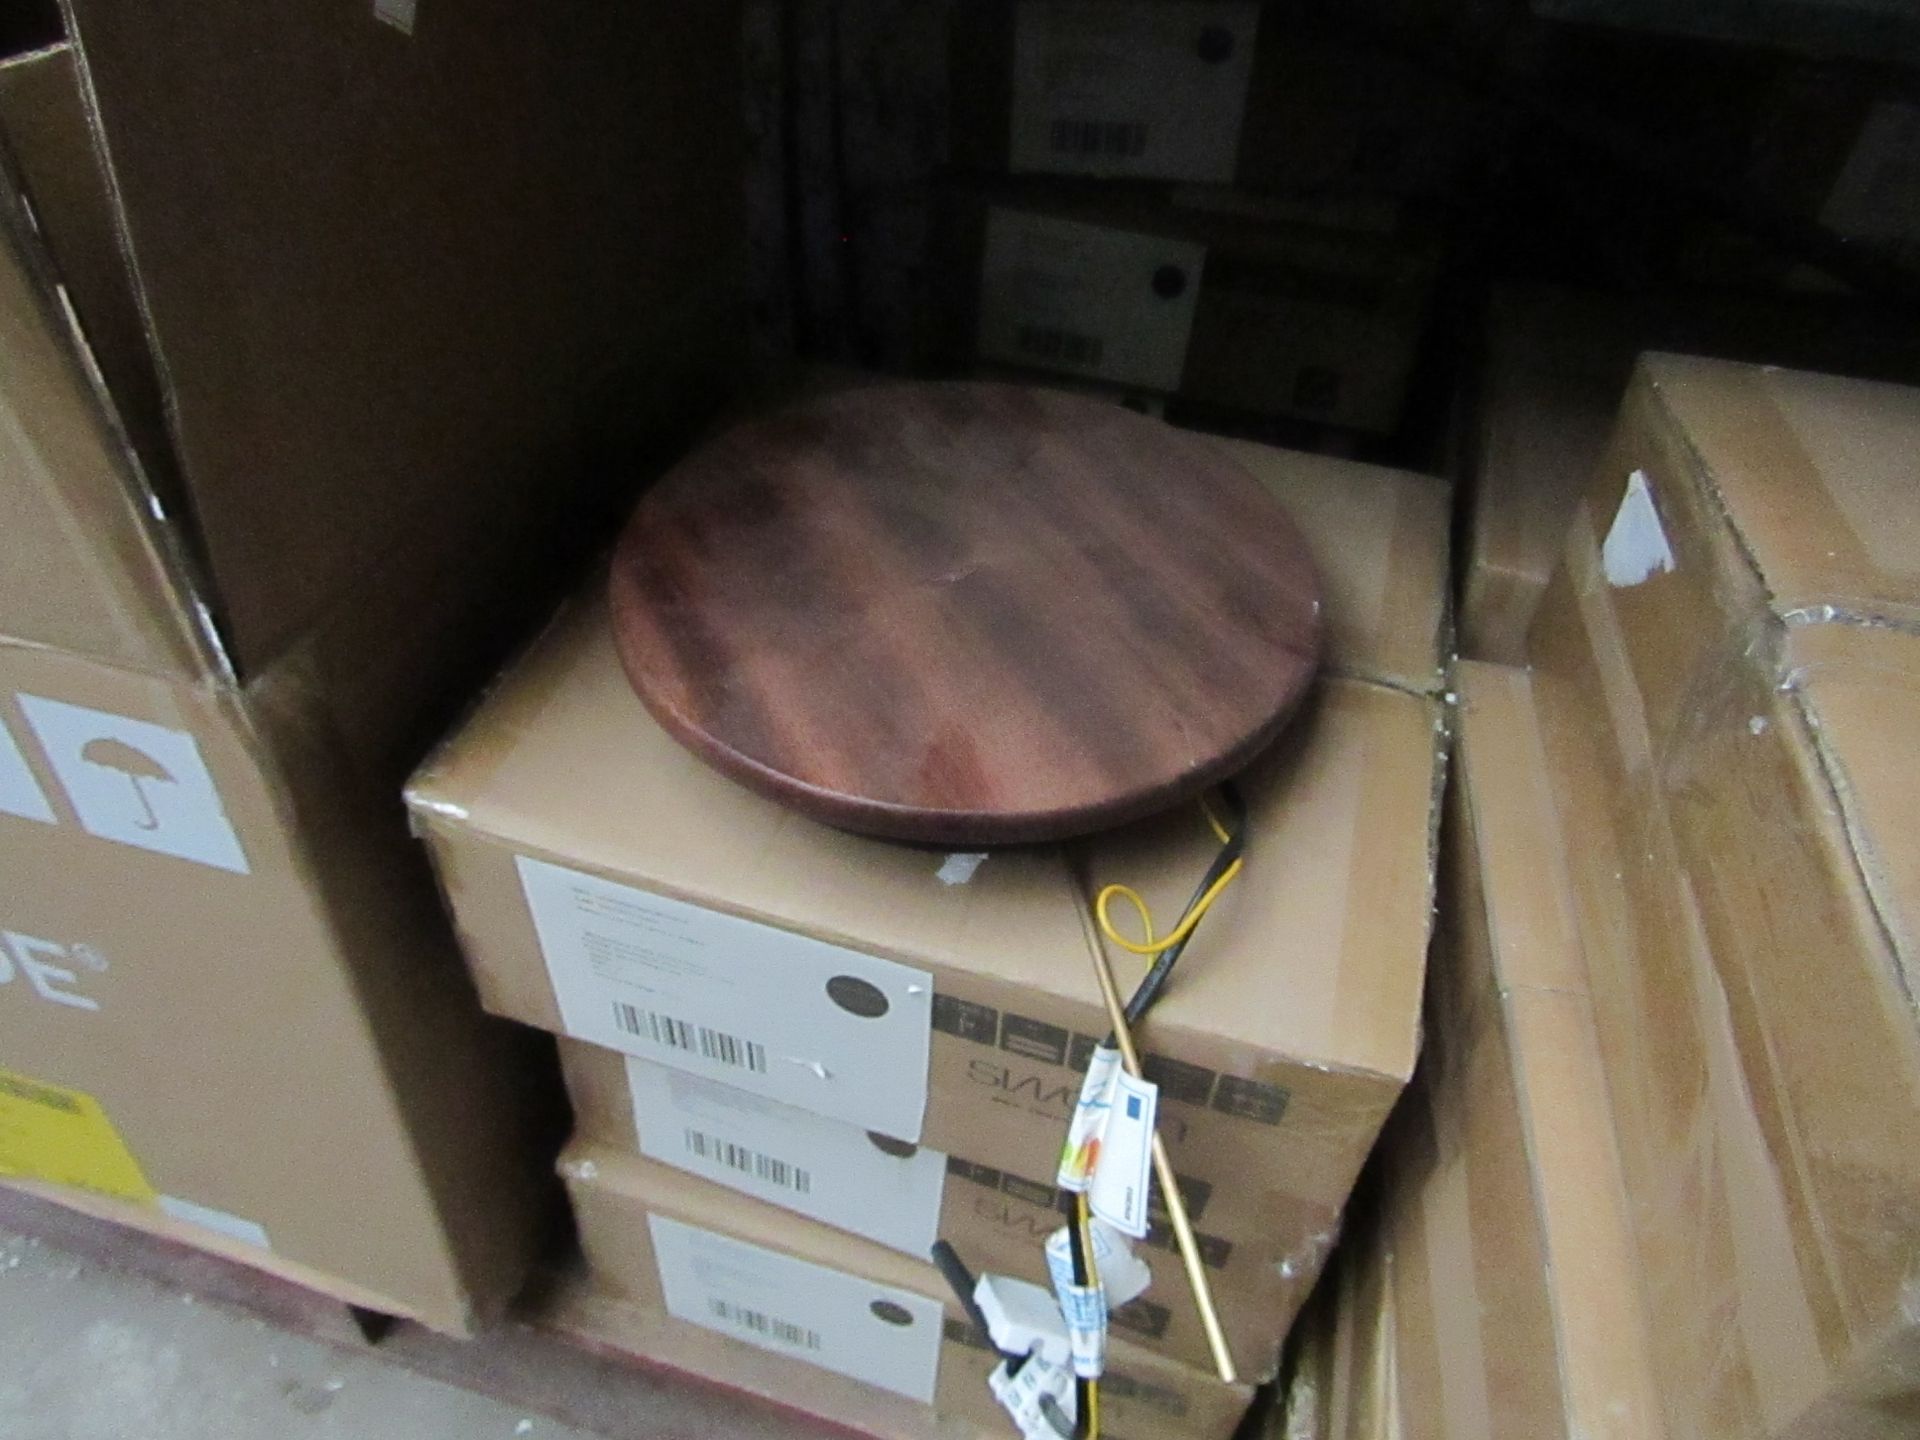 | 2x | SWOON LUNE WALL LIGHT IN WALNUT | LOOKS UNUSED AND BOXED | RRP £79 |